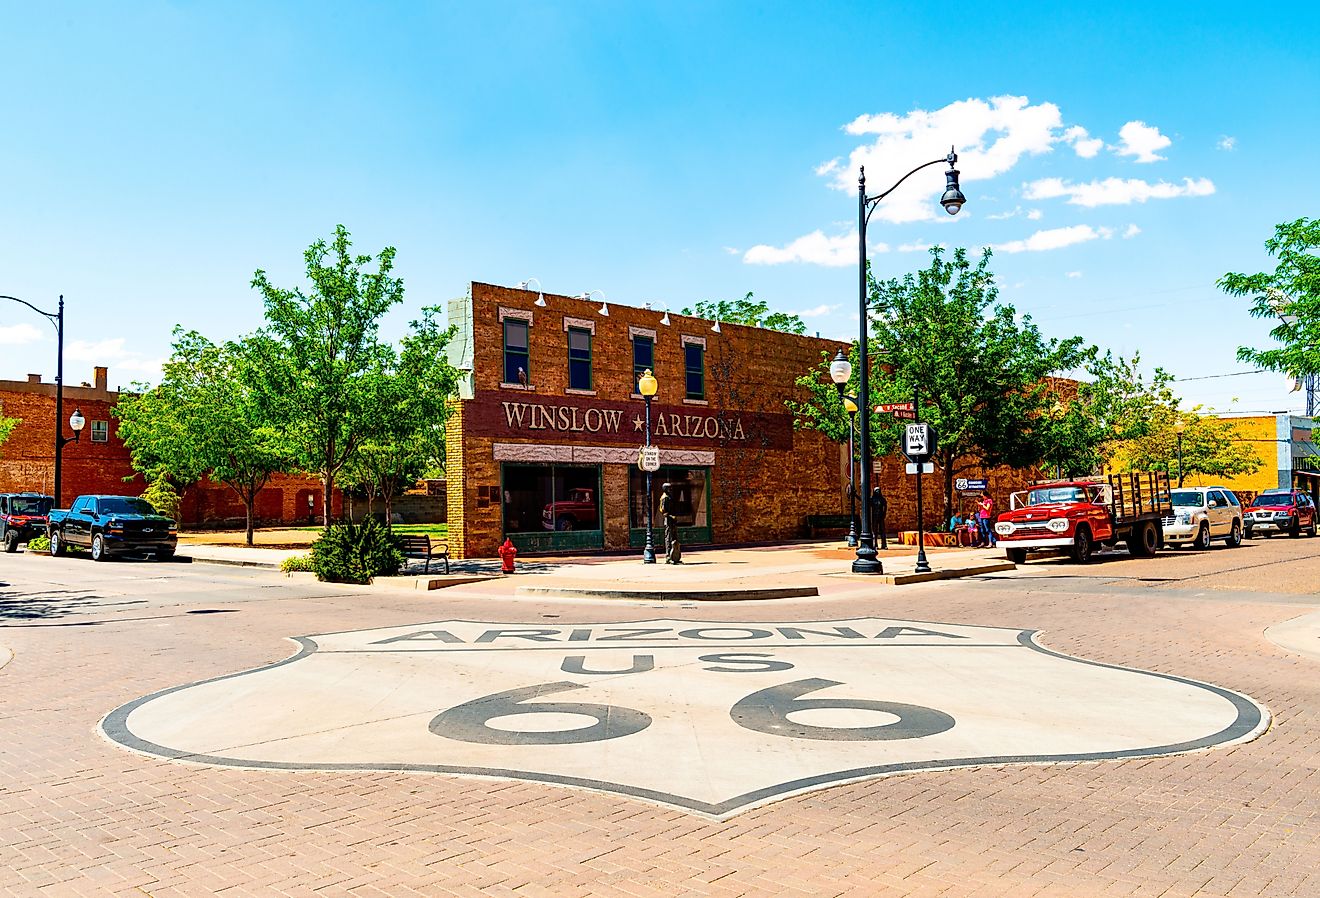 Standing on the corner of Historic Route 66 in Winslow, Arizona. Image credit mcrvlife via Shutterstock